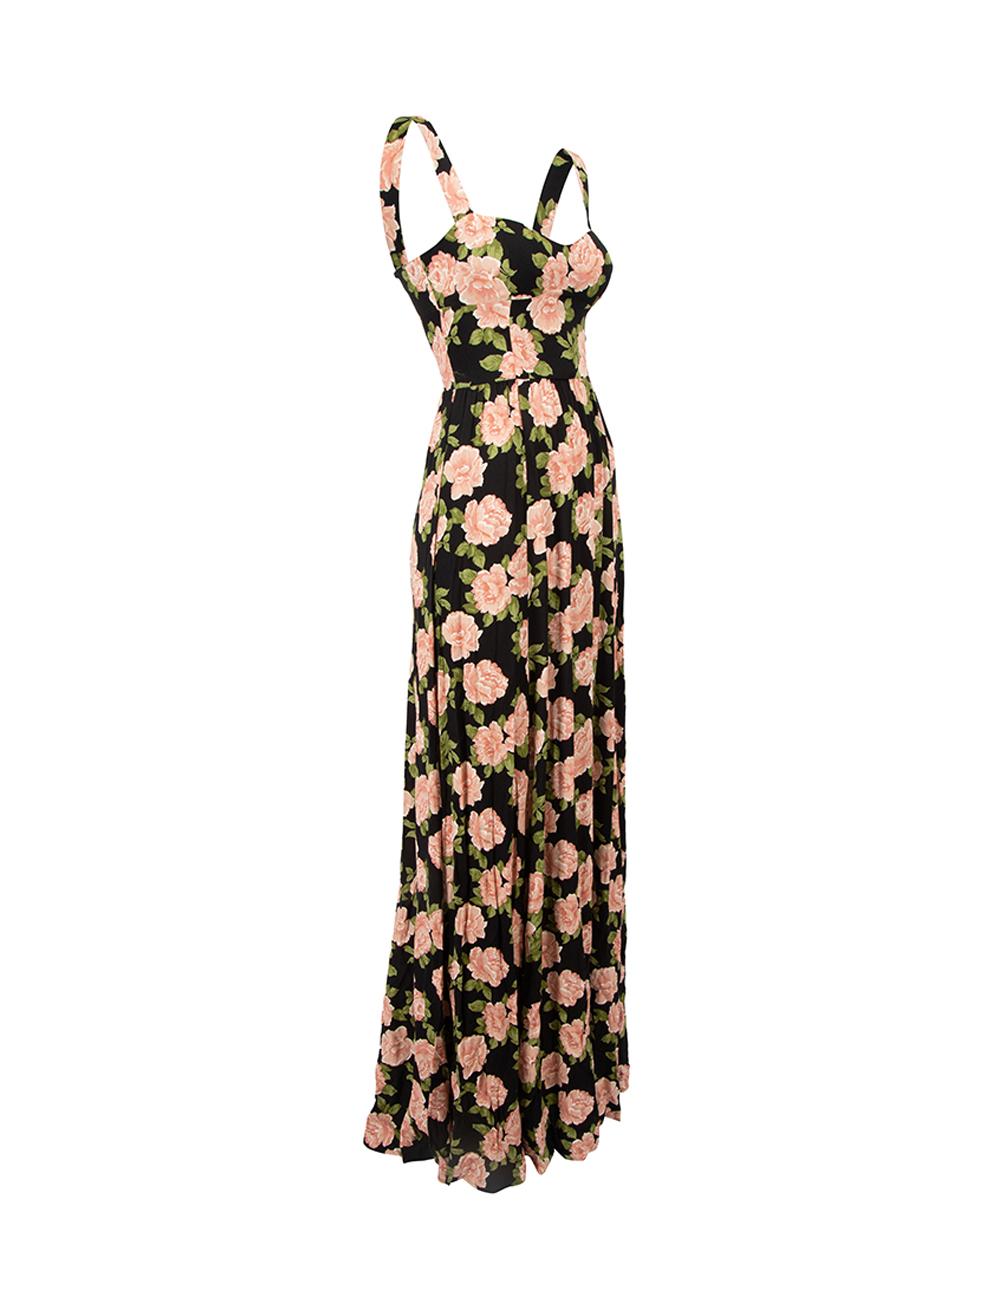 CONDITION is Never worn, with tags. No visible wear to dress is evident on this new Reformation designer resale item. 



Details


Black

Viscose

Maxi dress

Floral print pattern

Sweetheart neckline

Button adjustable shoulder strap

Ruched back